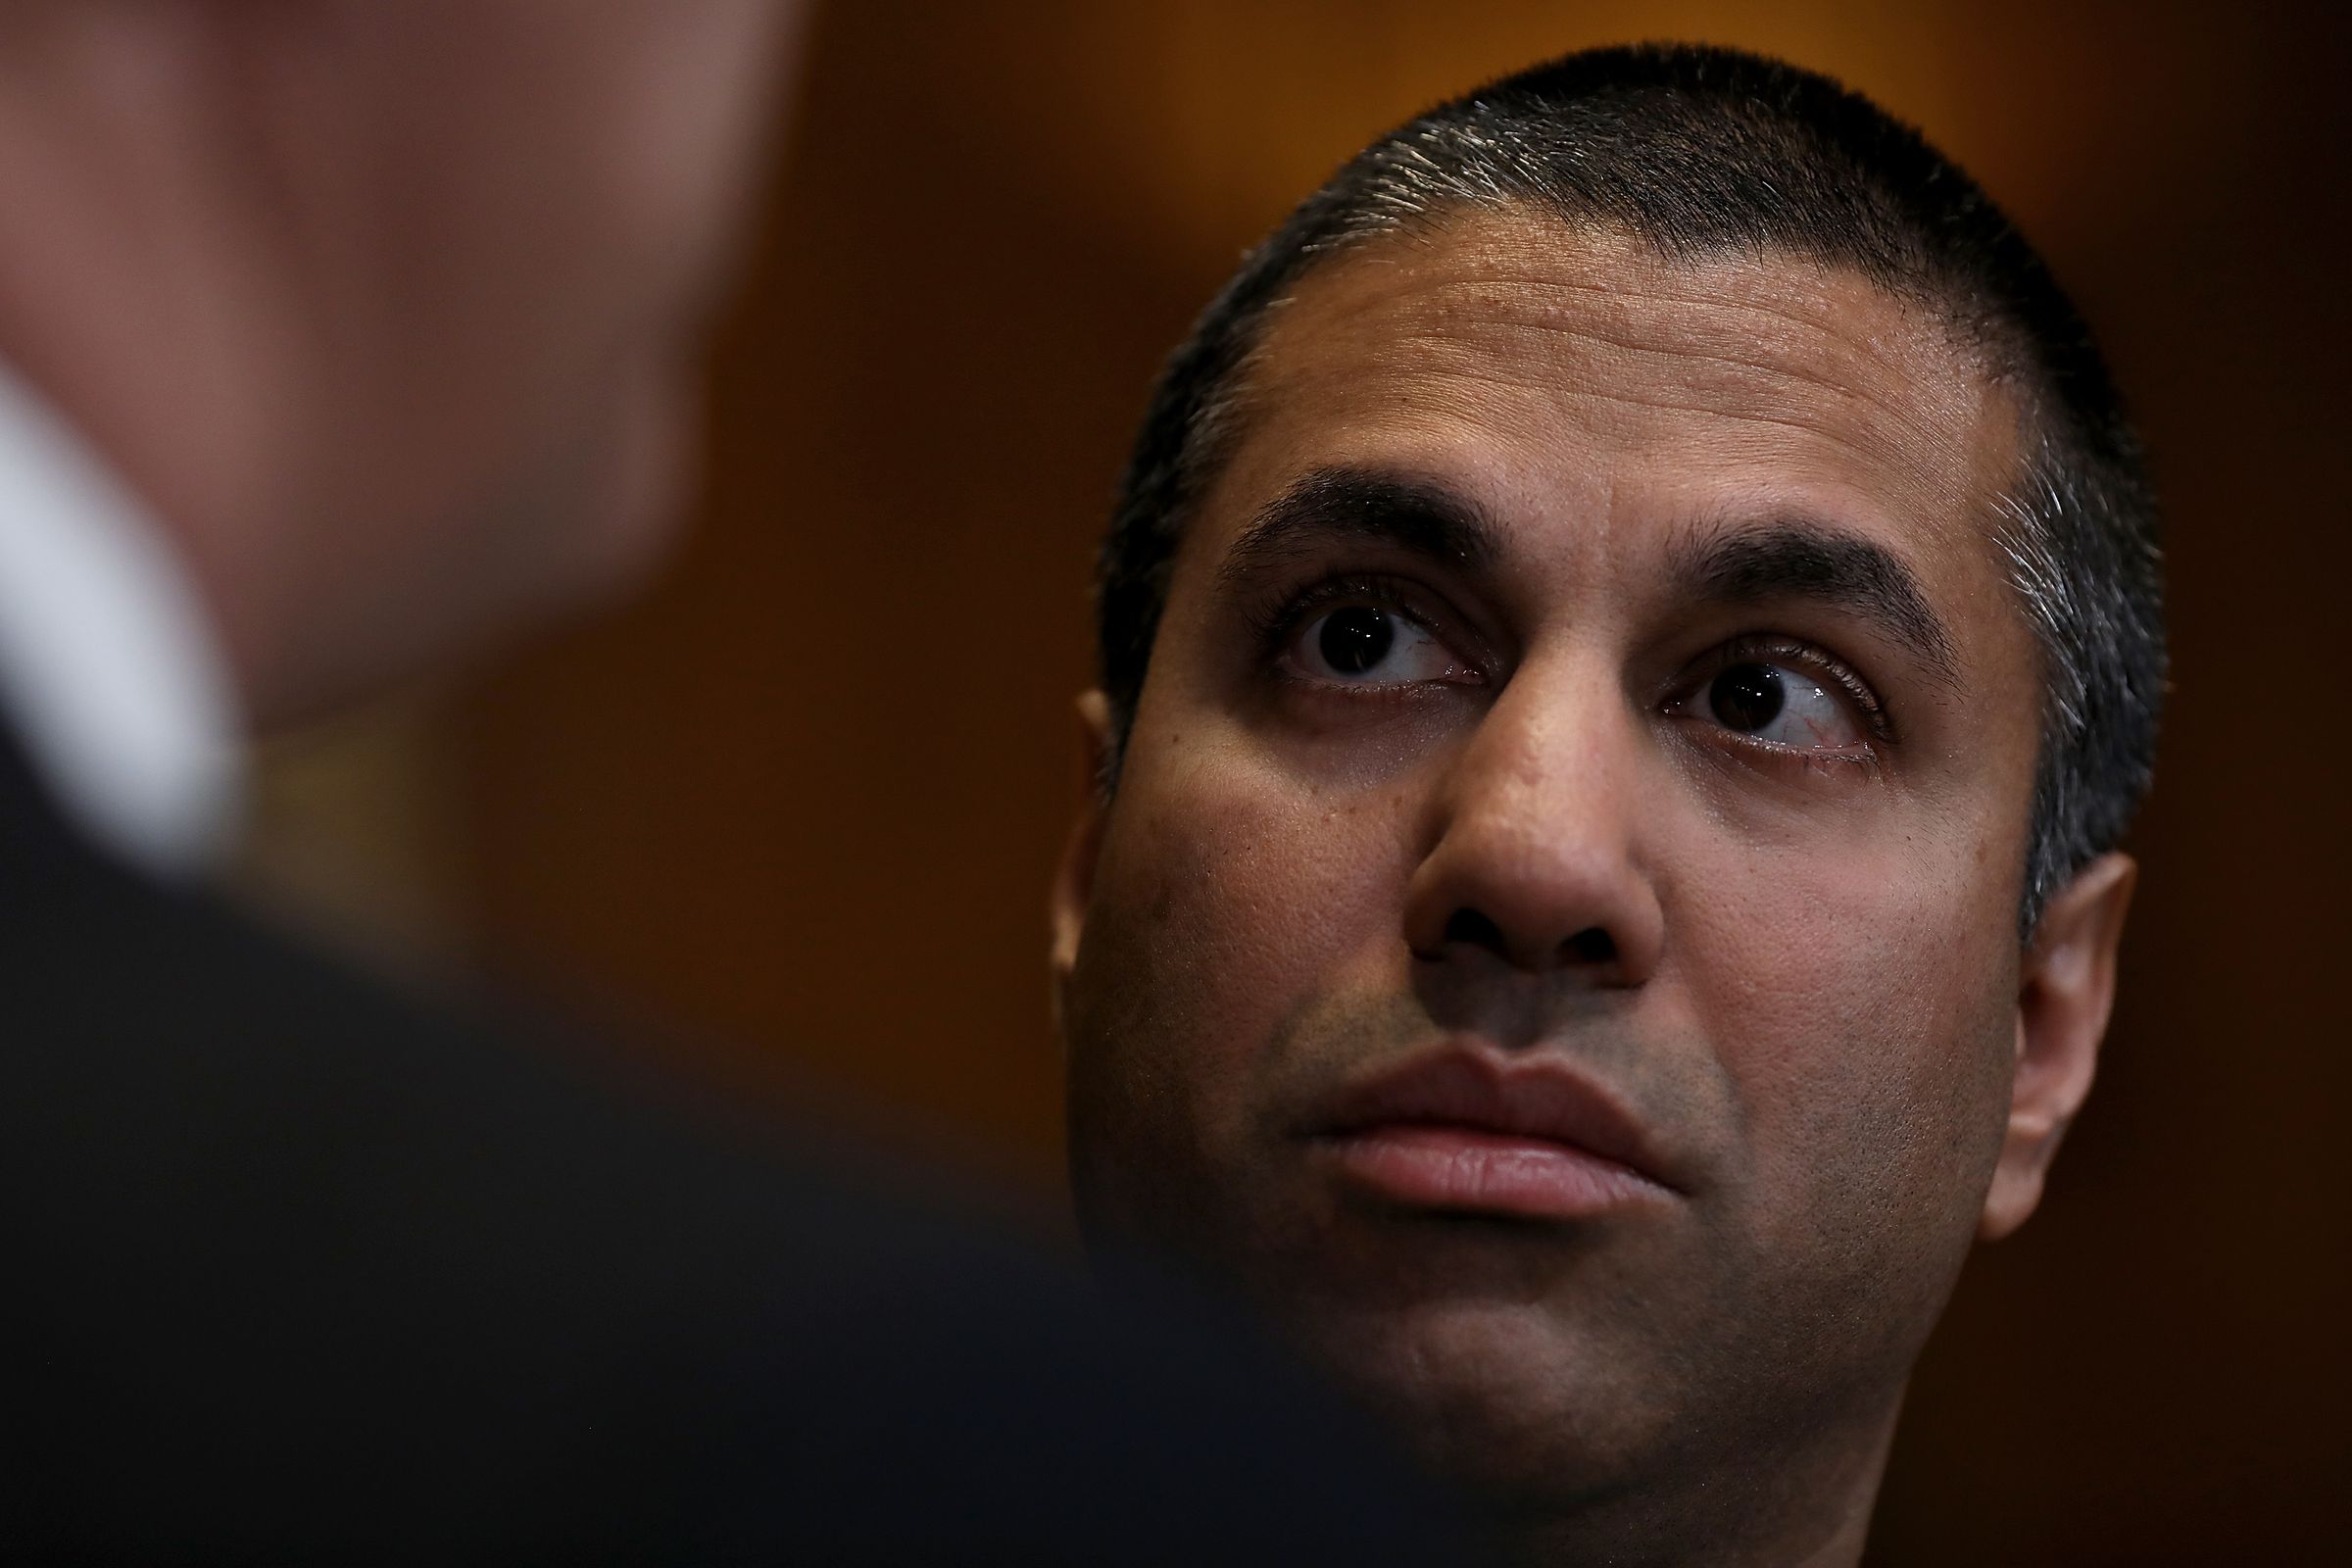 FCC Chairman Ajit Pai And FTC Chairman Joseph Simons Testify To Senate Appropriations Committee Hearing On Their Dept.’s Budget